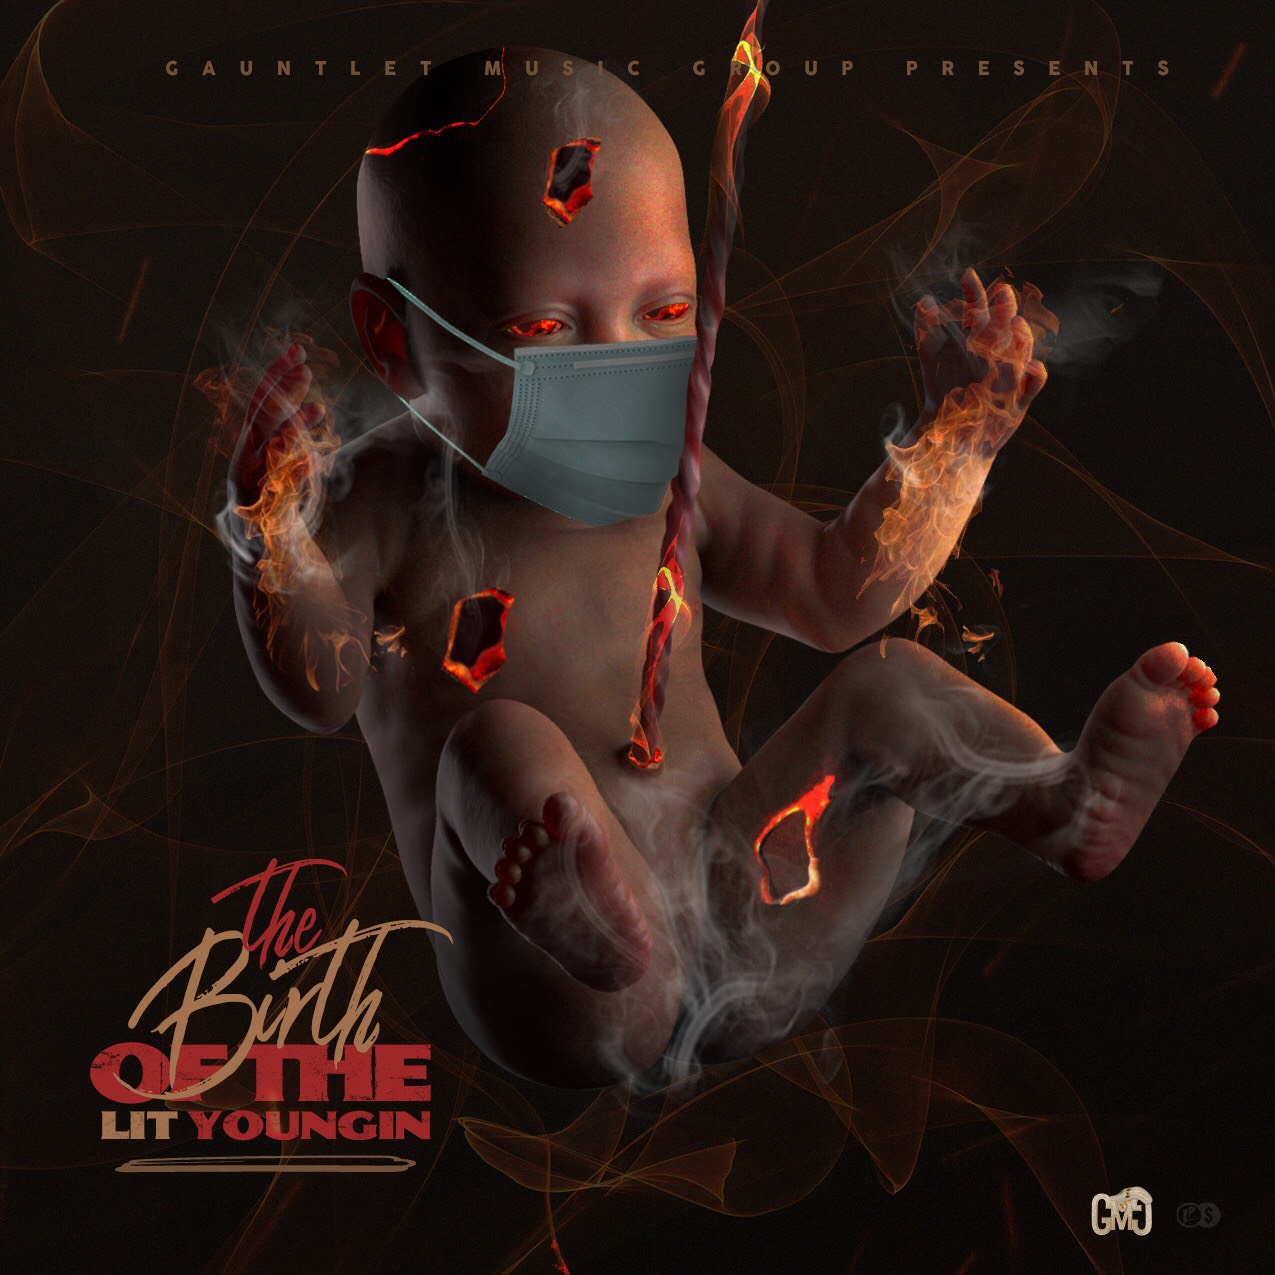 Lit Youngin - The Birth Of The Lit Youngin Cover Art